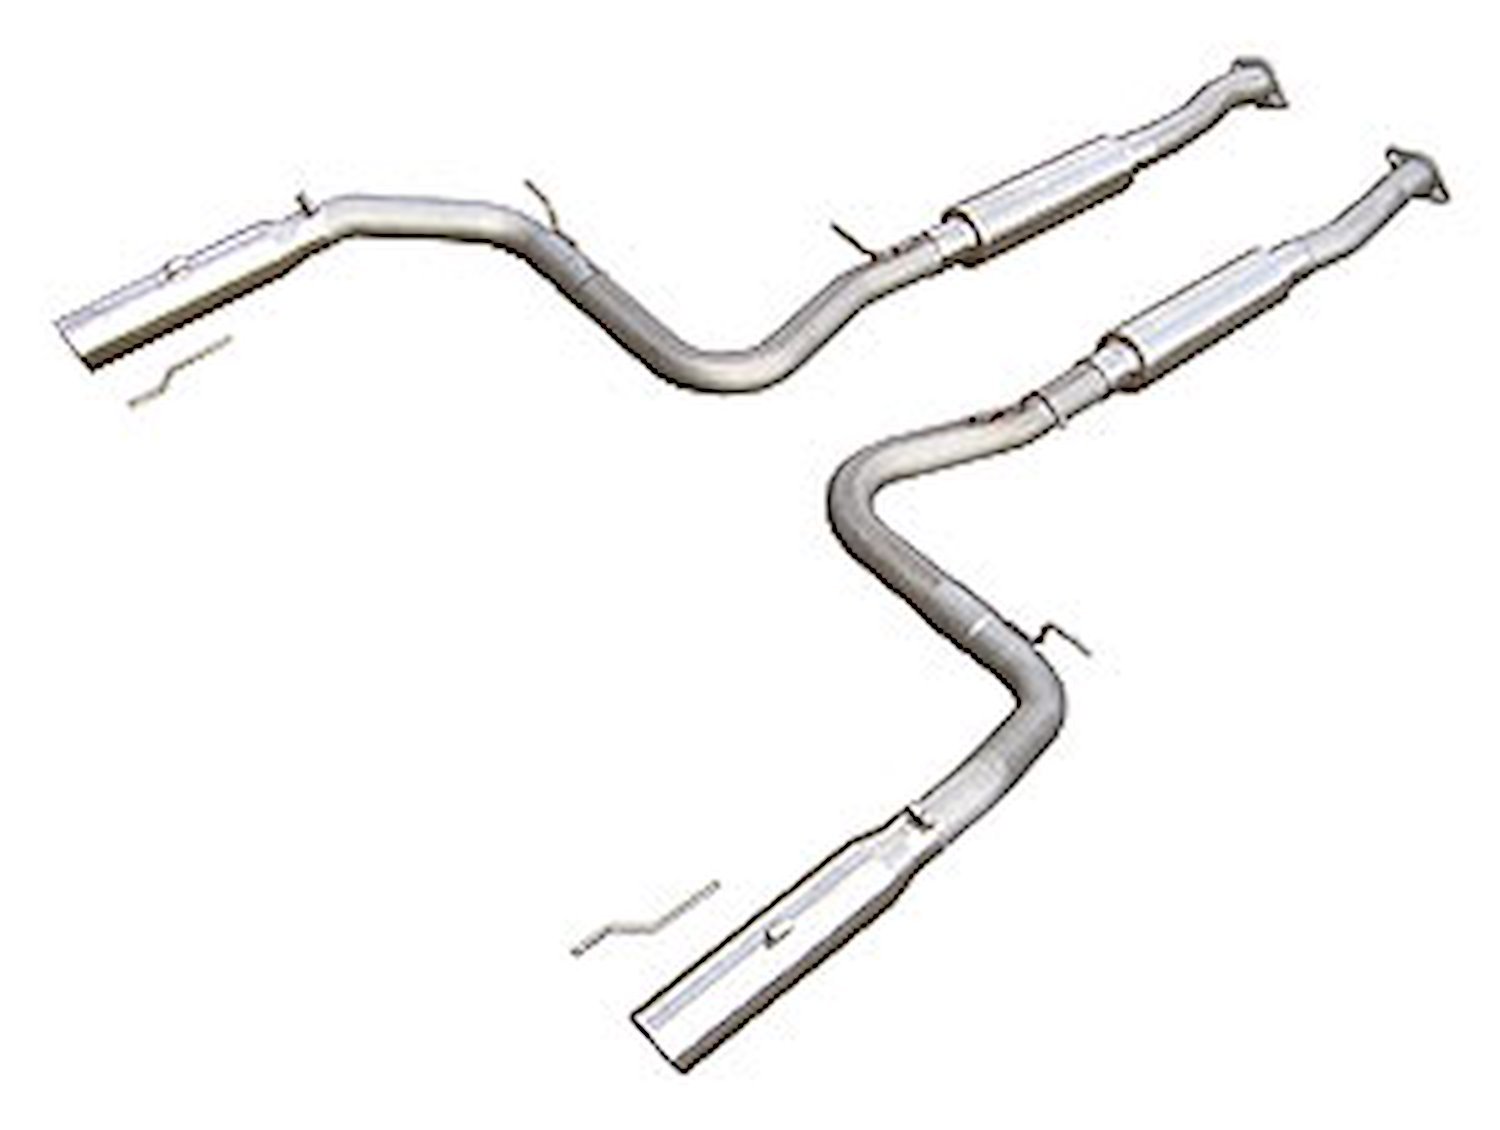 Violator Cat-Back Exhaust System 1999-04 Mustang Cobra 4.6L with IRS